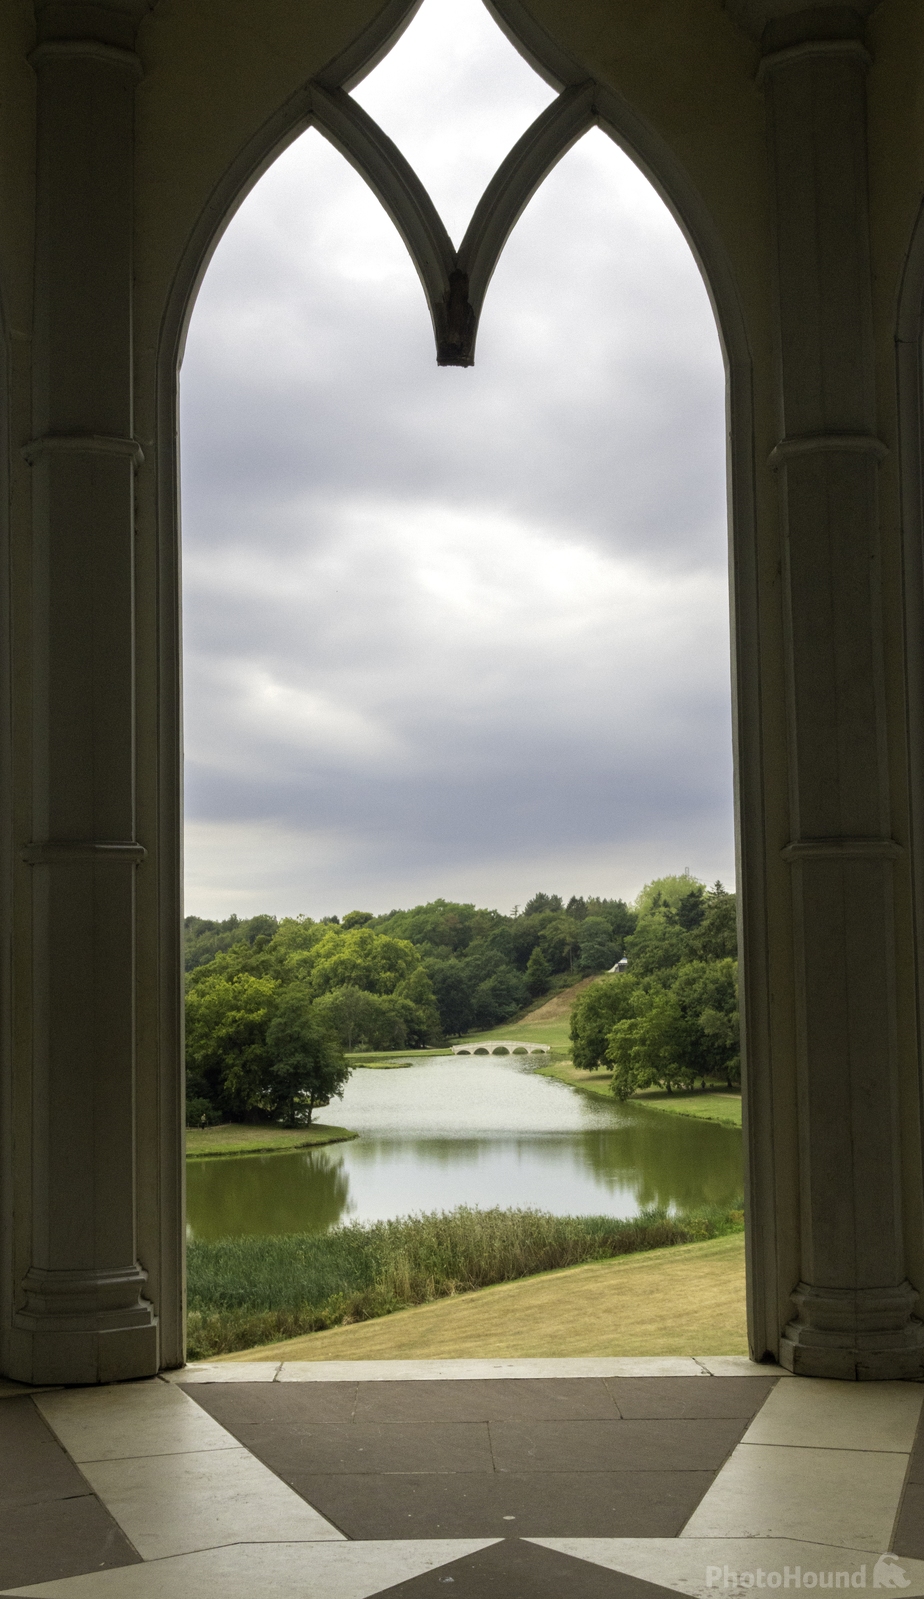 Image of Painshill Park by Amethyst Draakziel